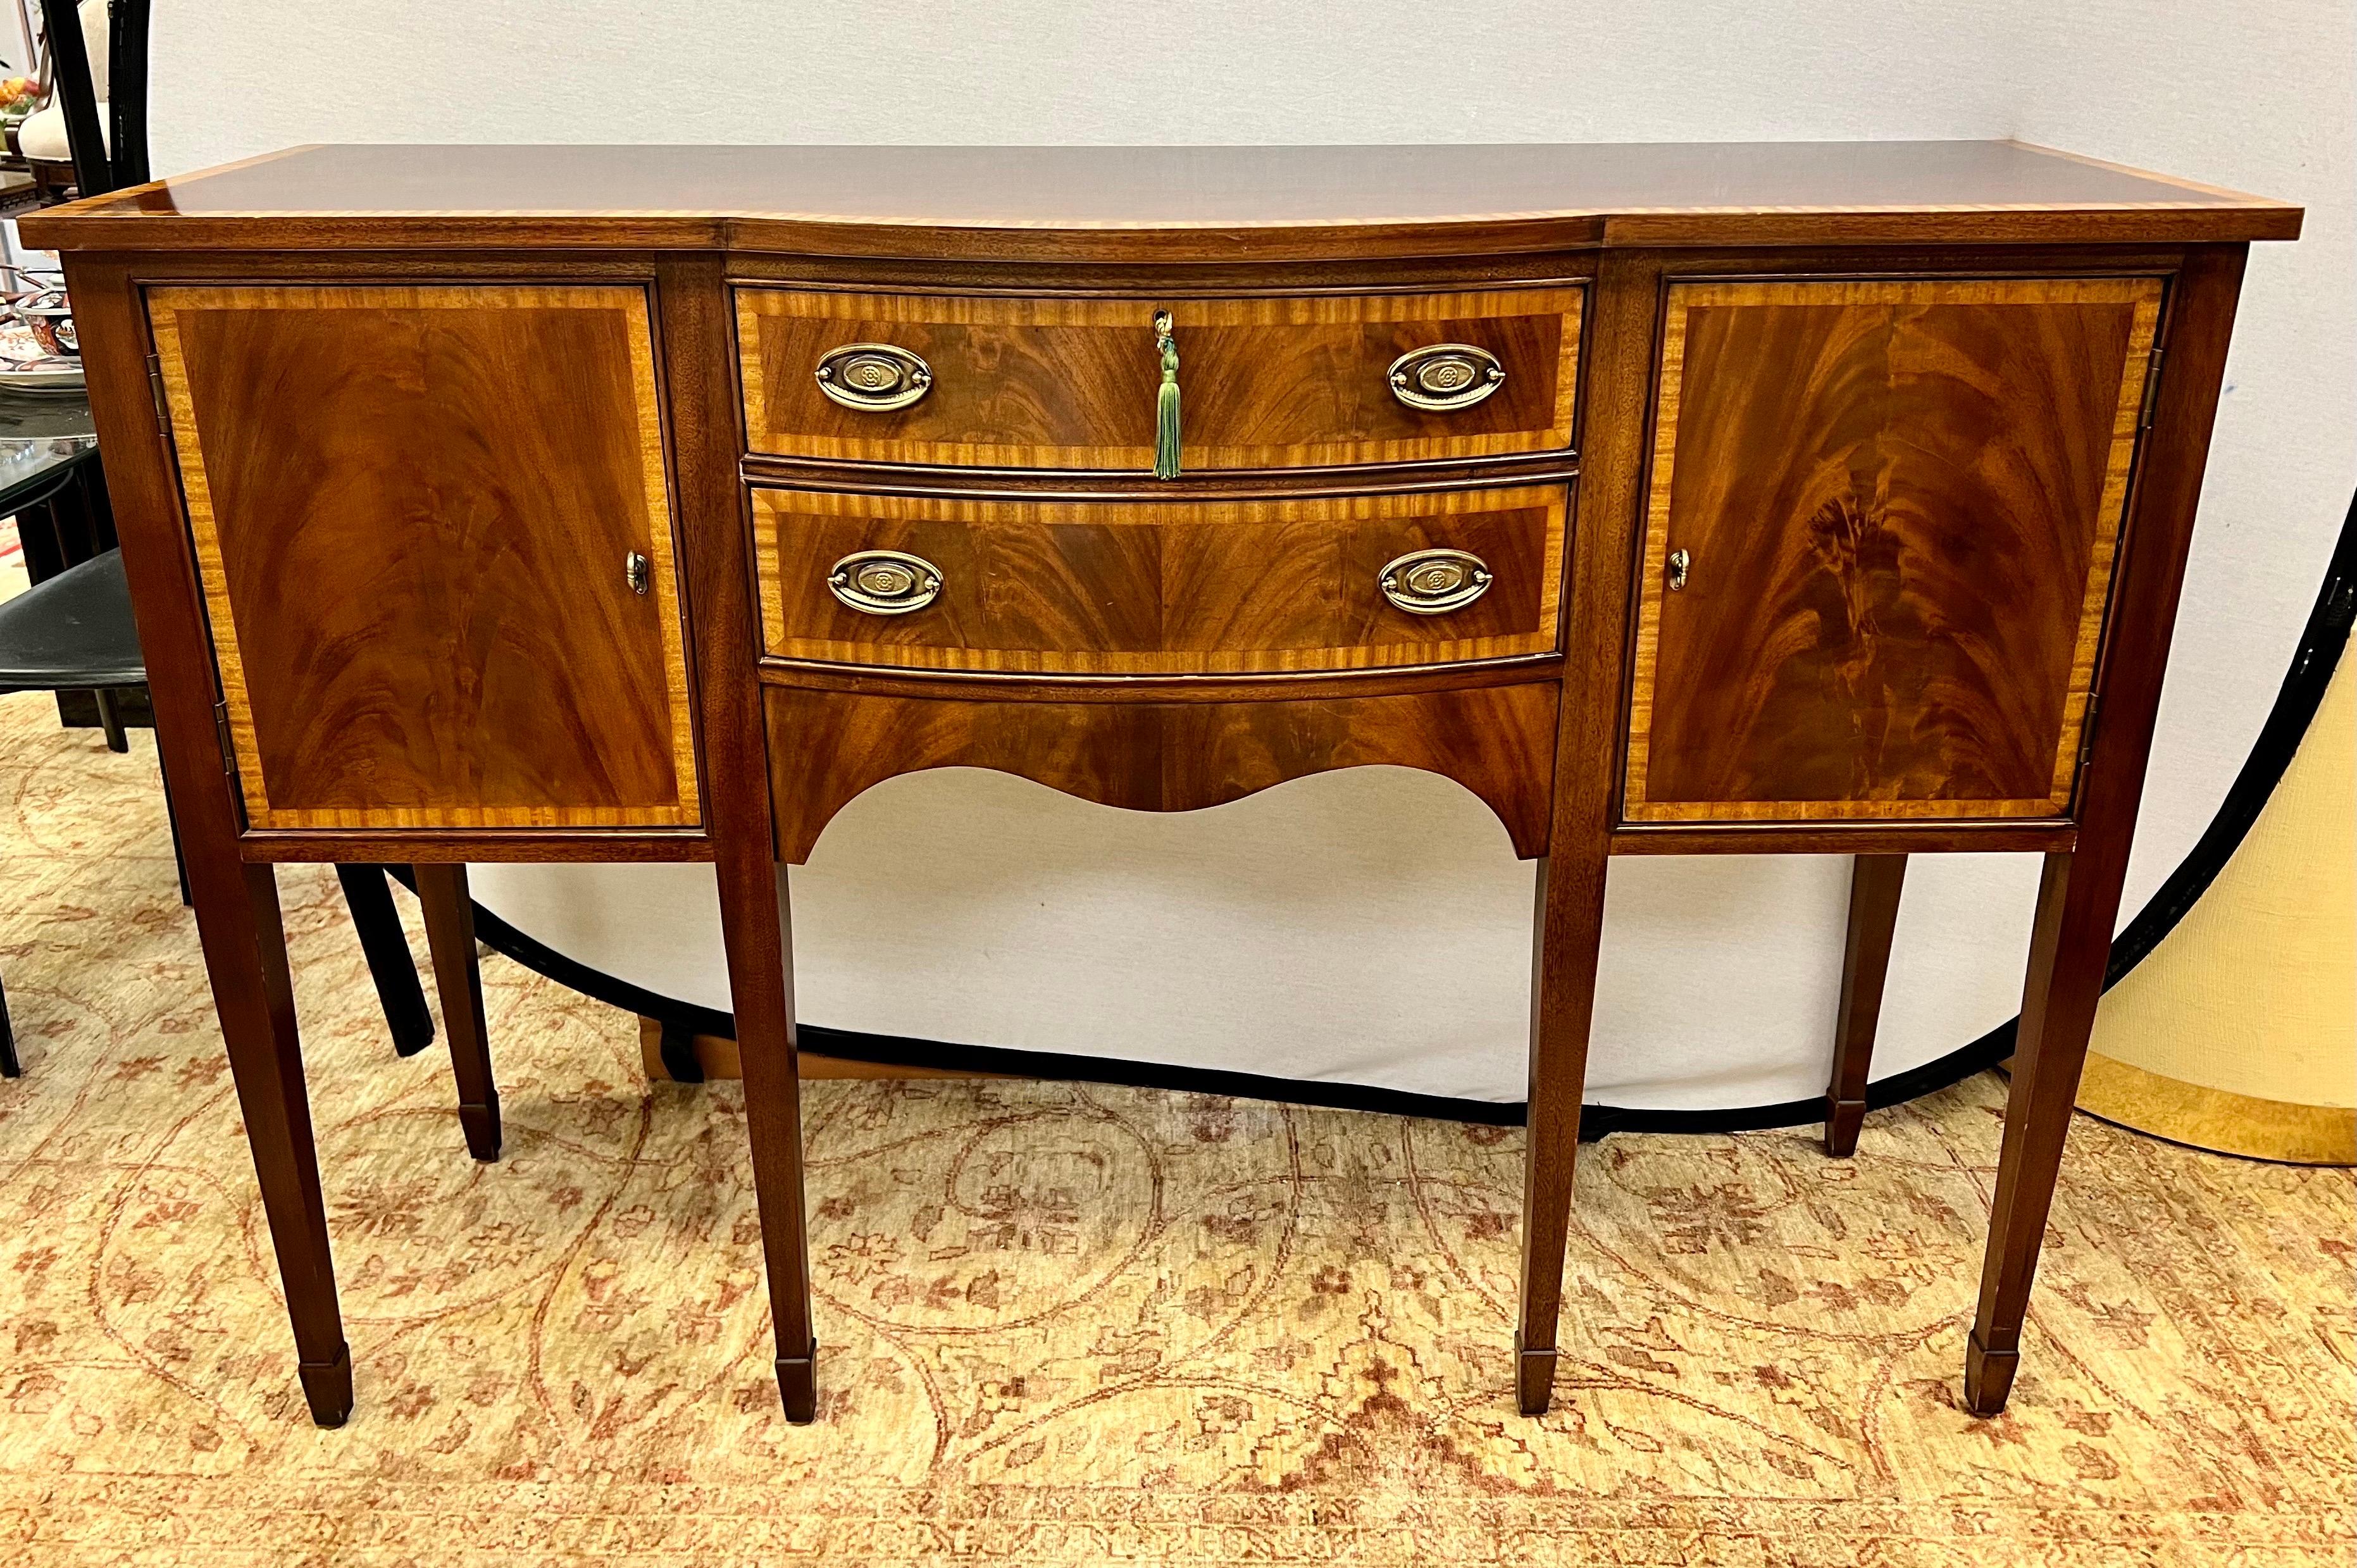 Elegant mahogany sideboard/buffet that features ribbon inlay on top, doors and two drawer front, and incredible craftsmanship. Supported on six tapered legs. Felt silver liner in top drawer for your sterling. Working lock and key present and